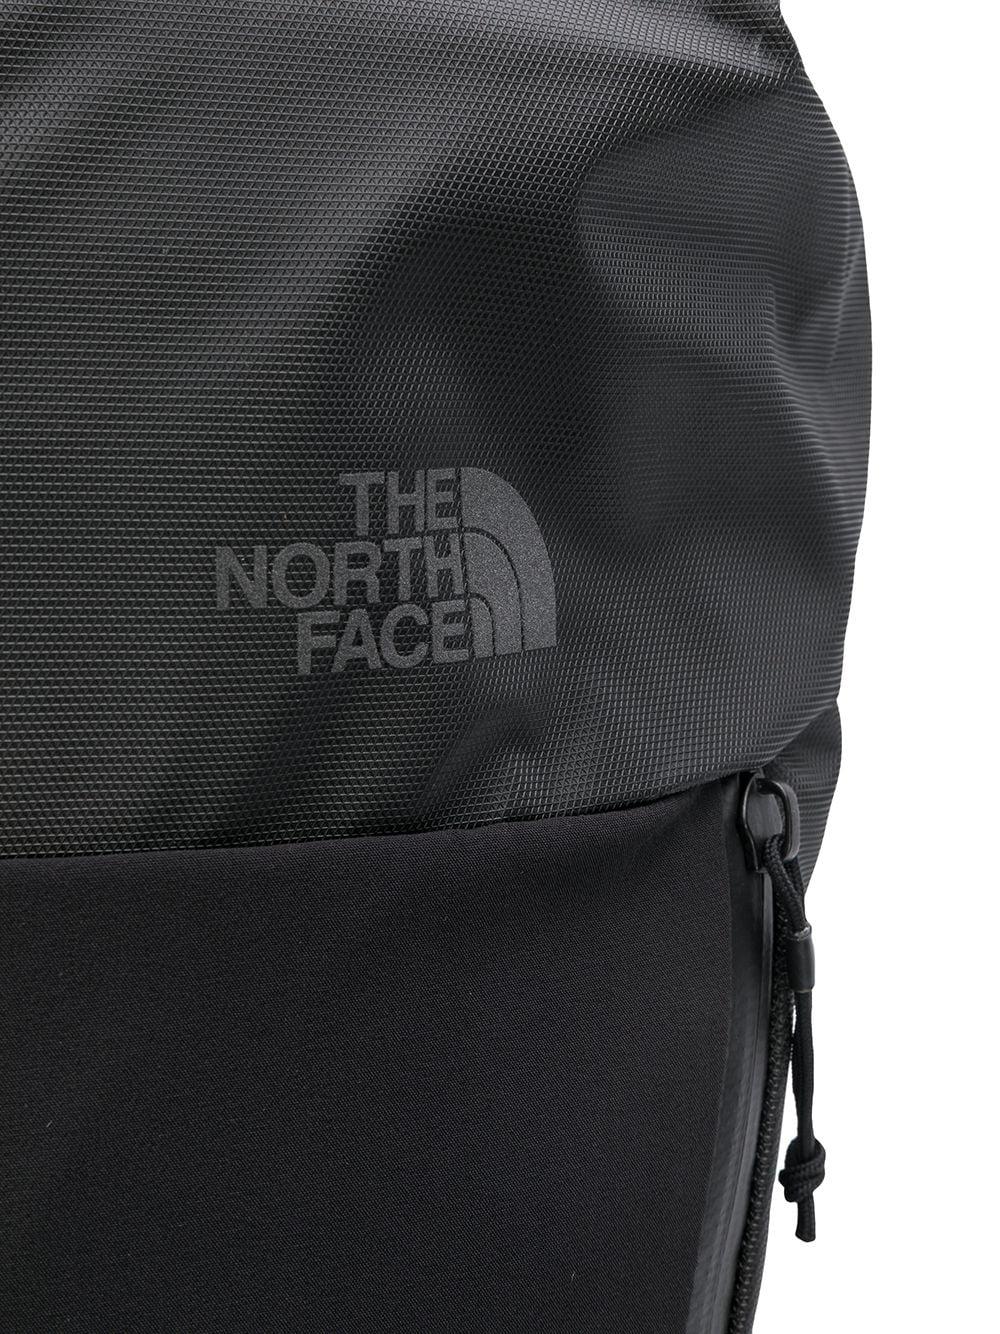 The North Face Foldover-top Large Backpack in Black for Men - Lyst